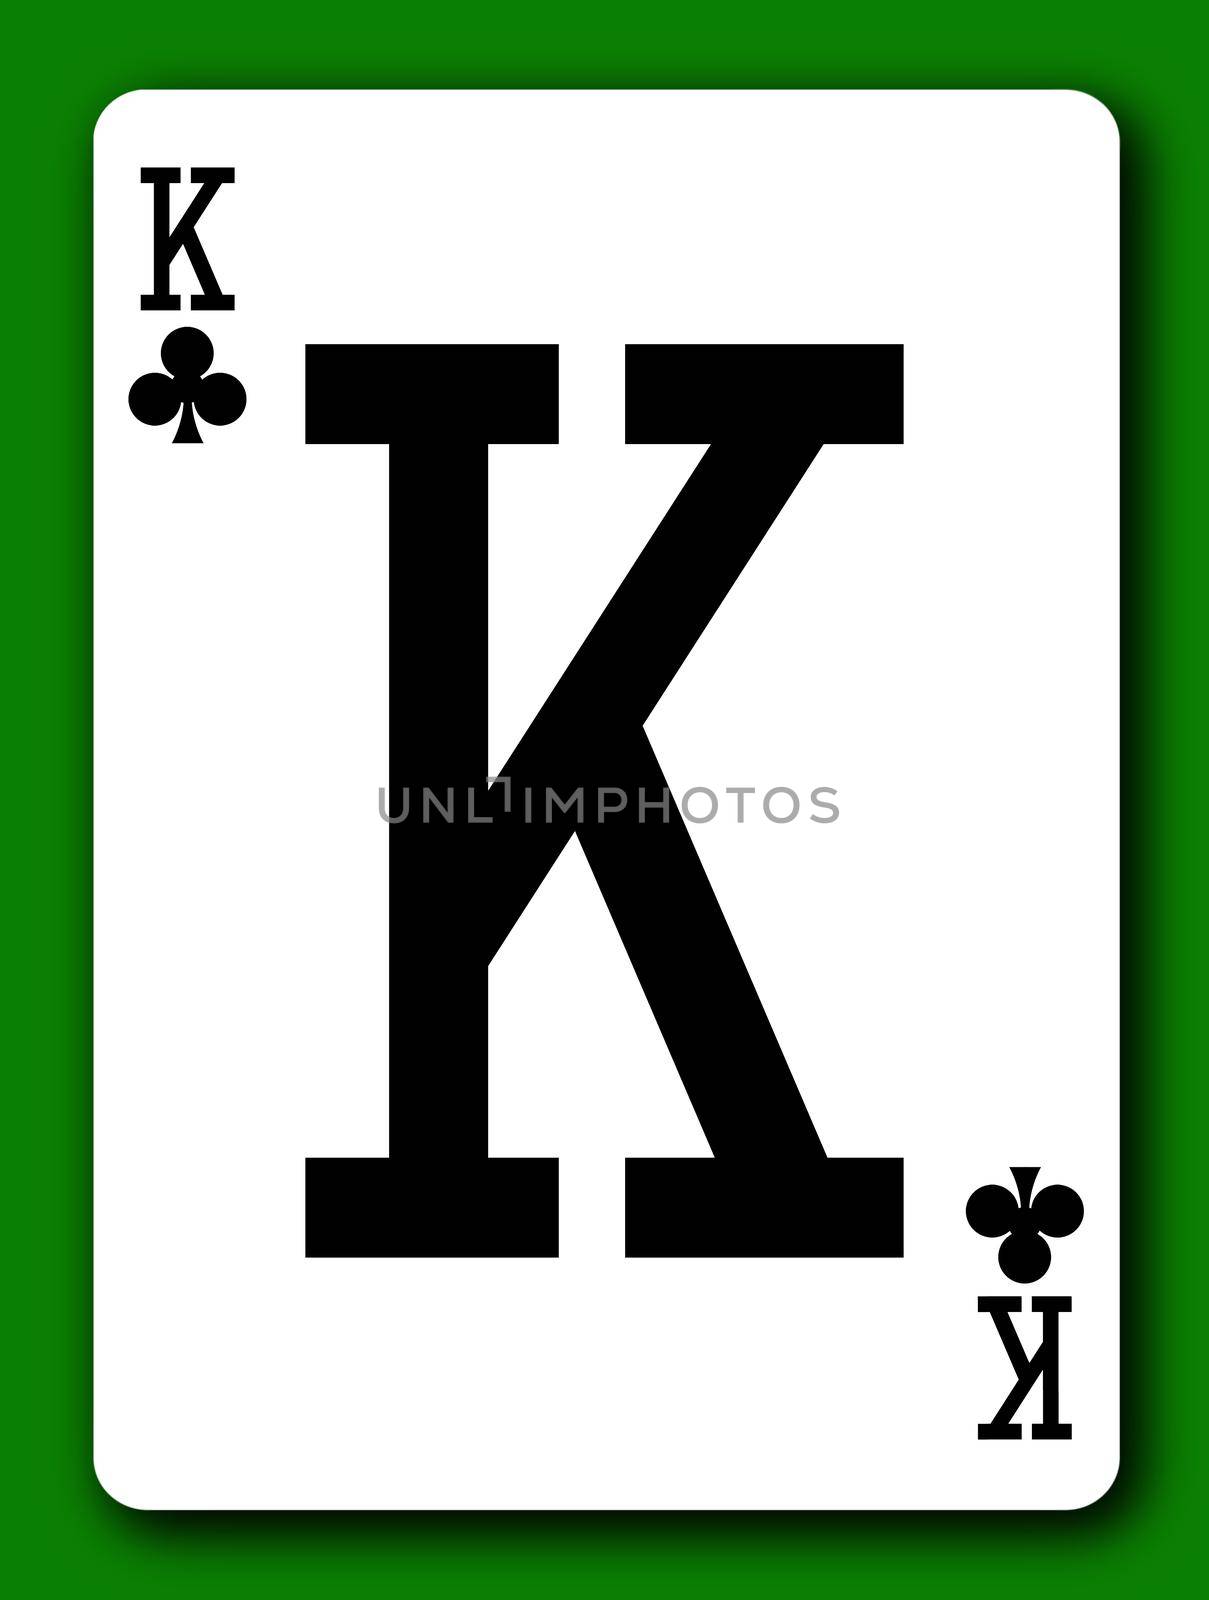 King of Clubs playing card with clipping path to remove background and shadow